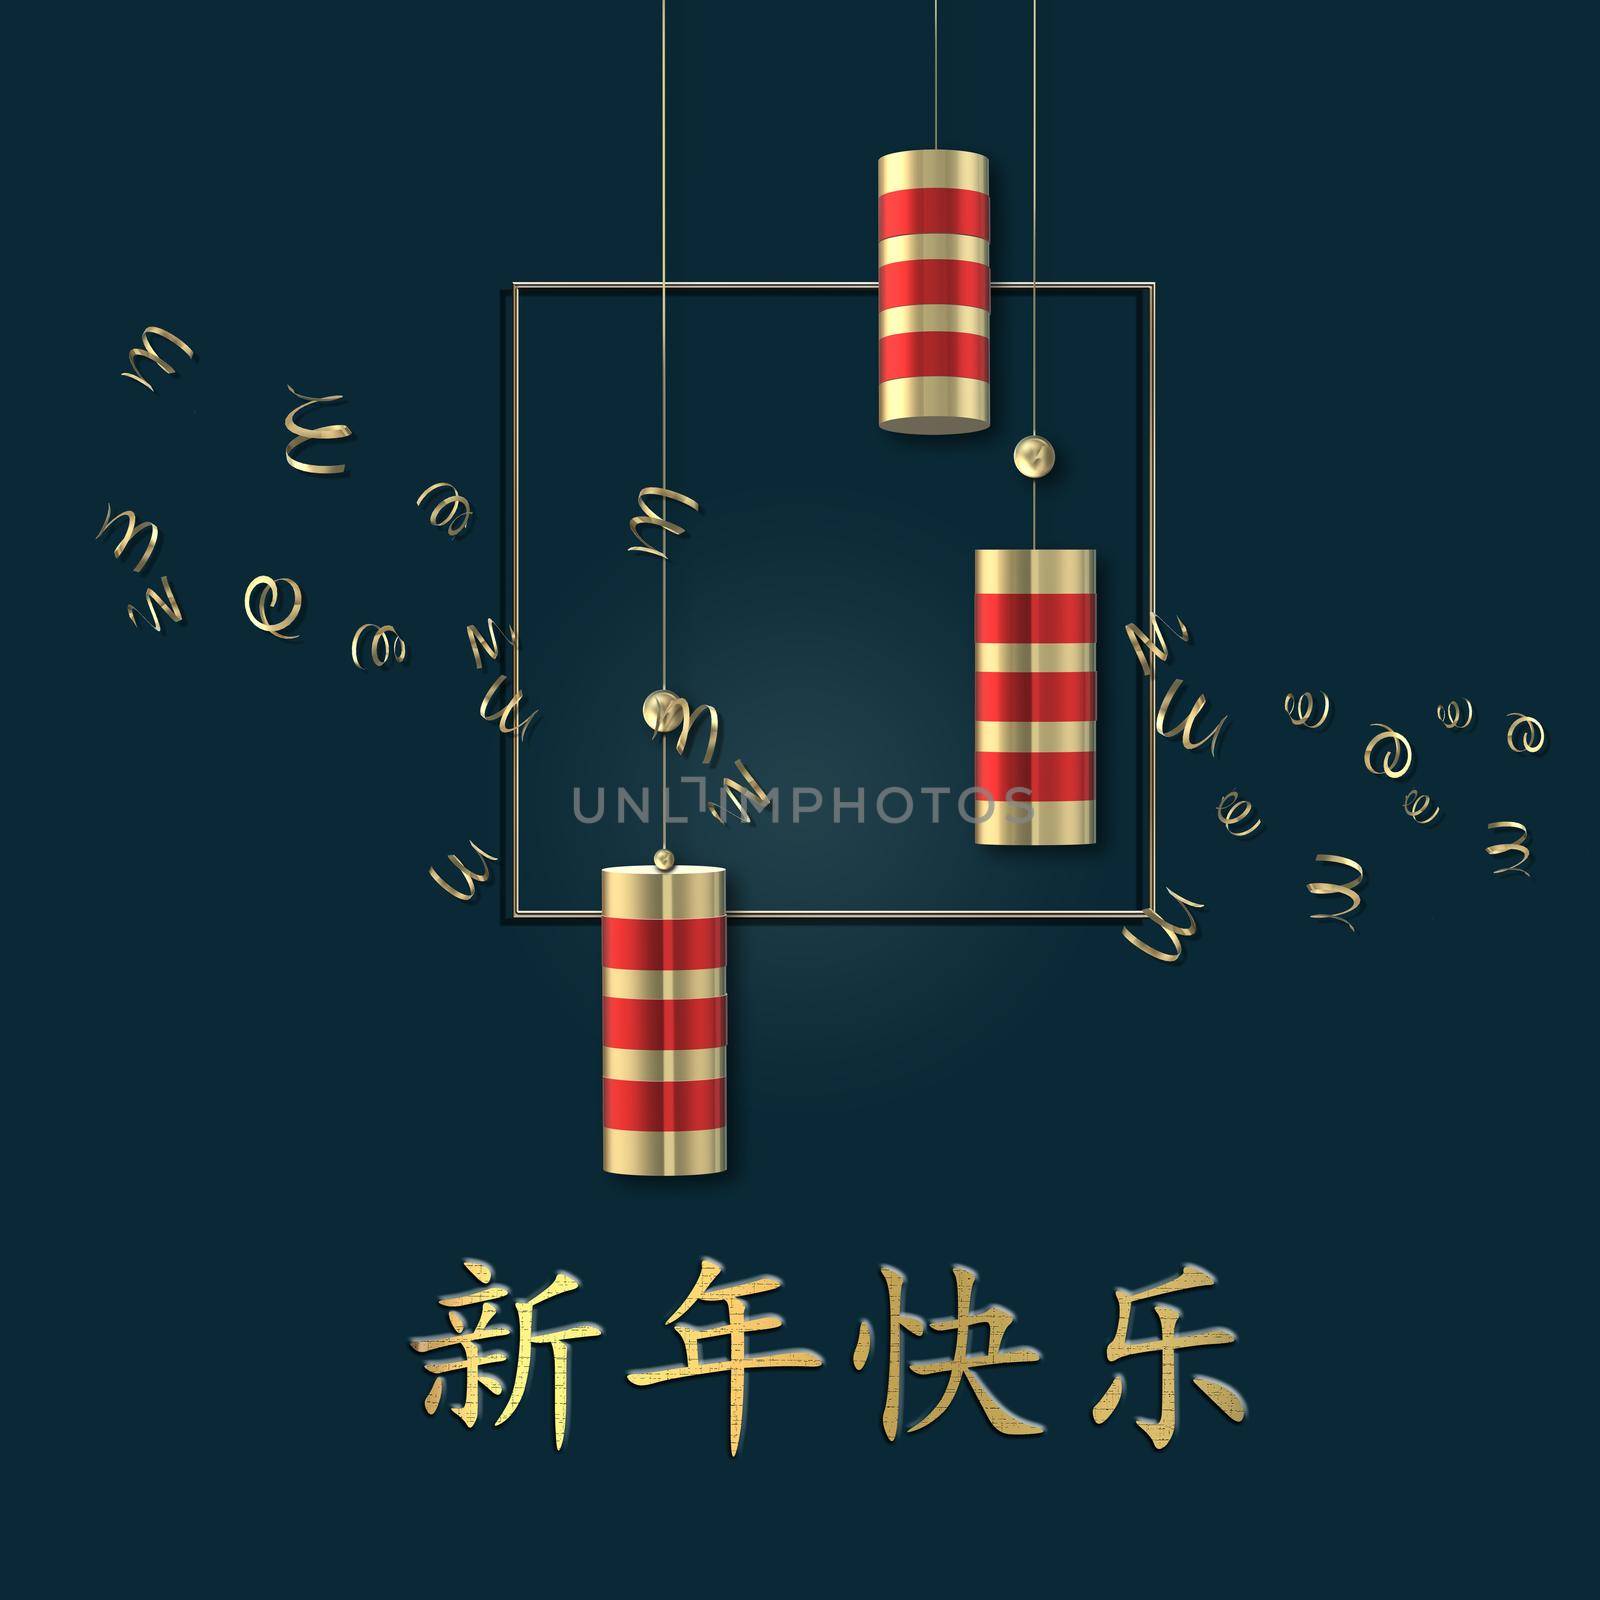 Chinese new year. Red crackers. Oriental Asian symbols on blue background with confetti. Gold Chinese text Happy New Year. 3D render